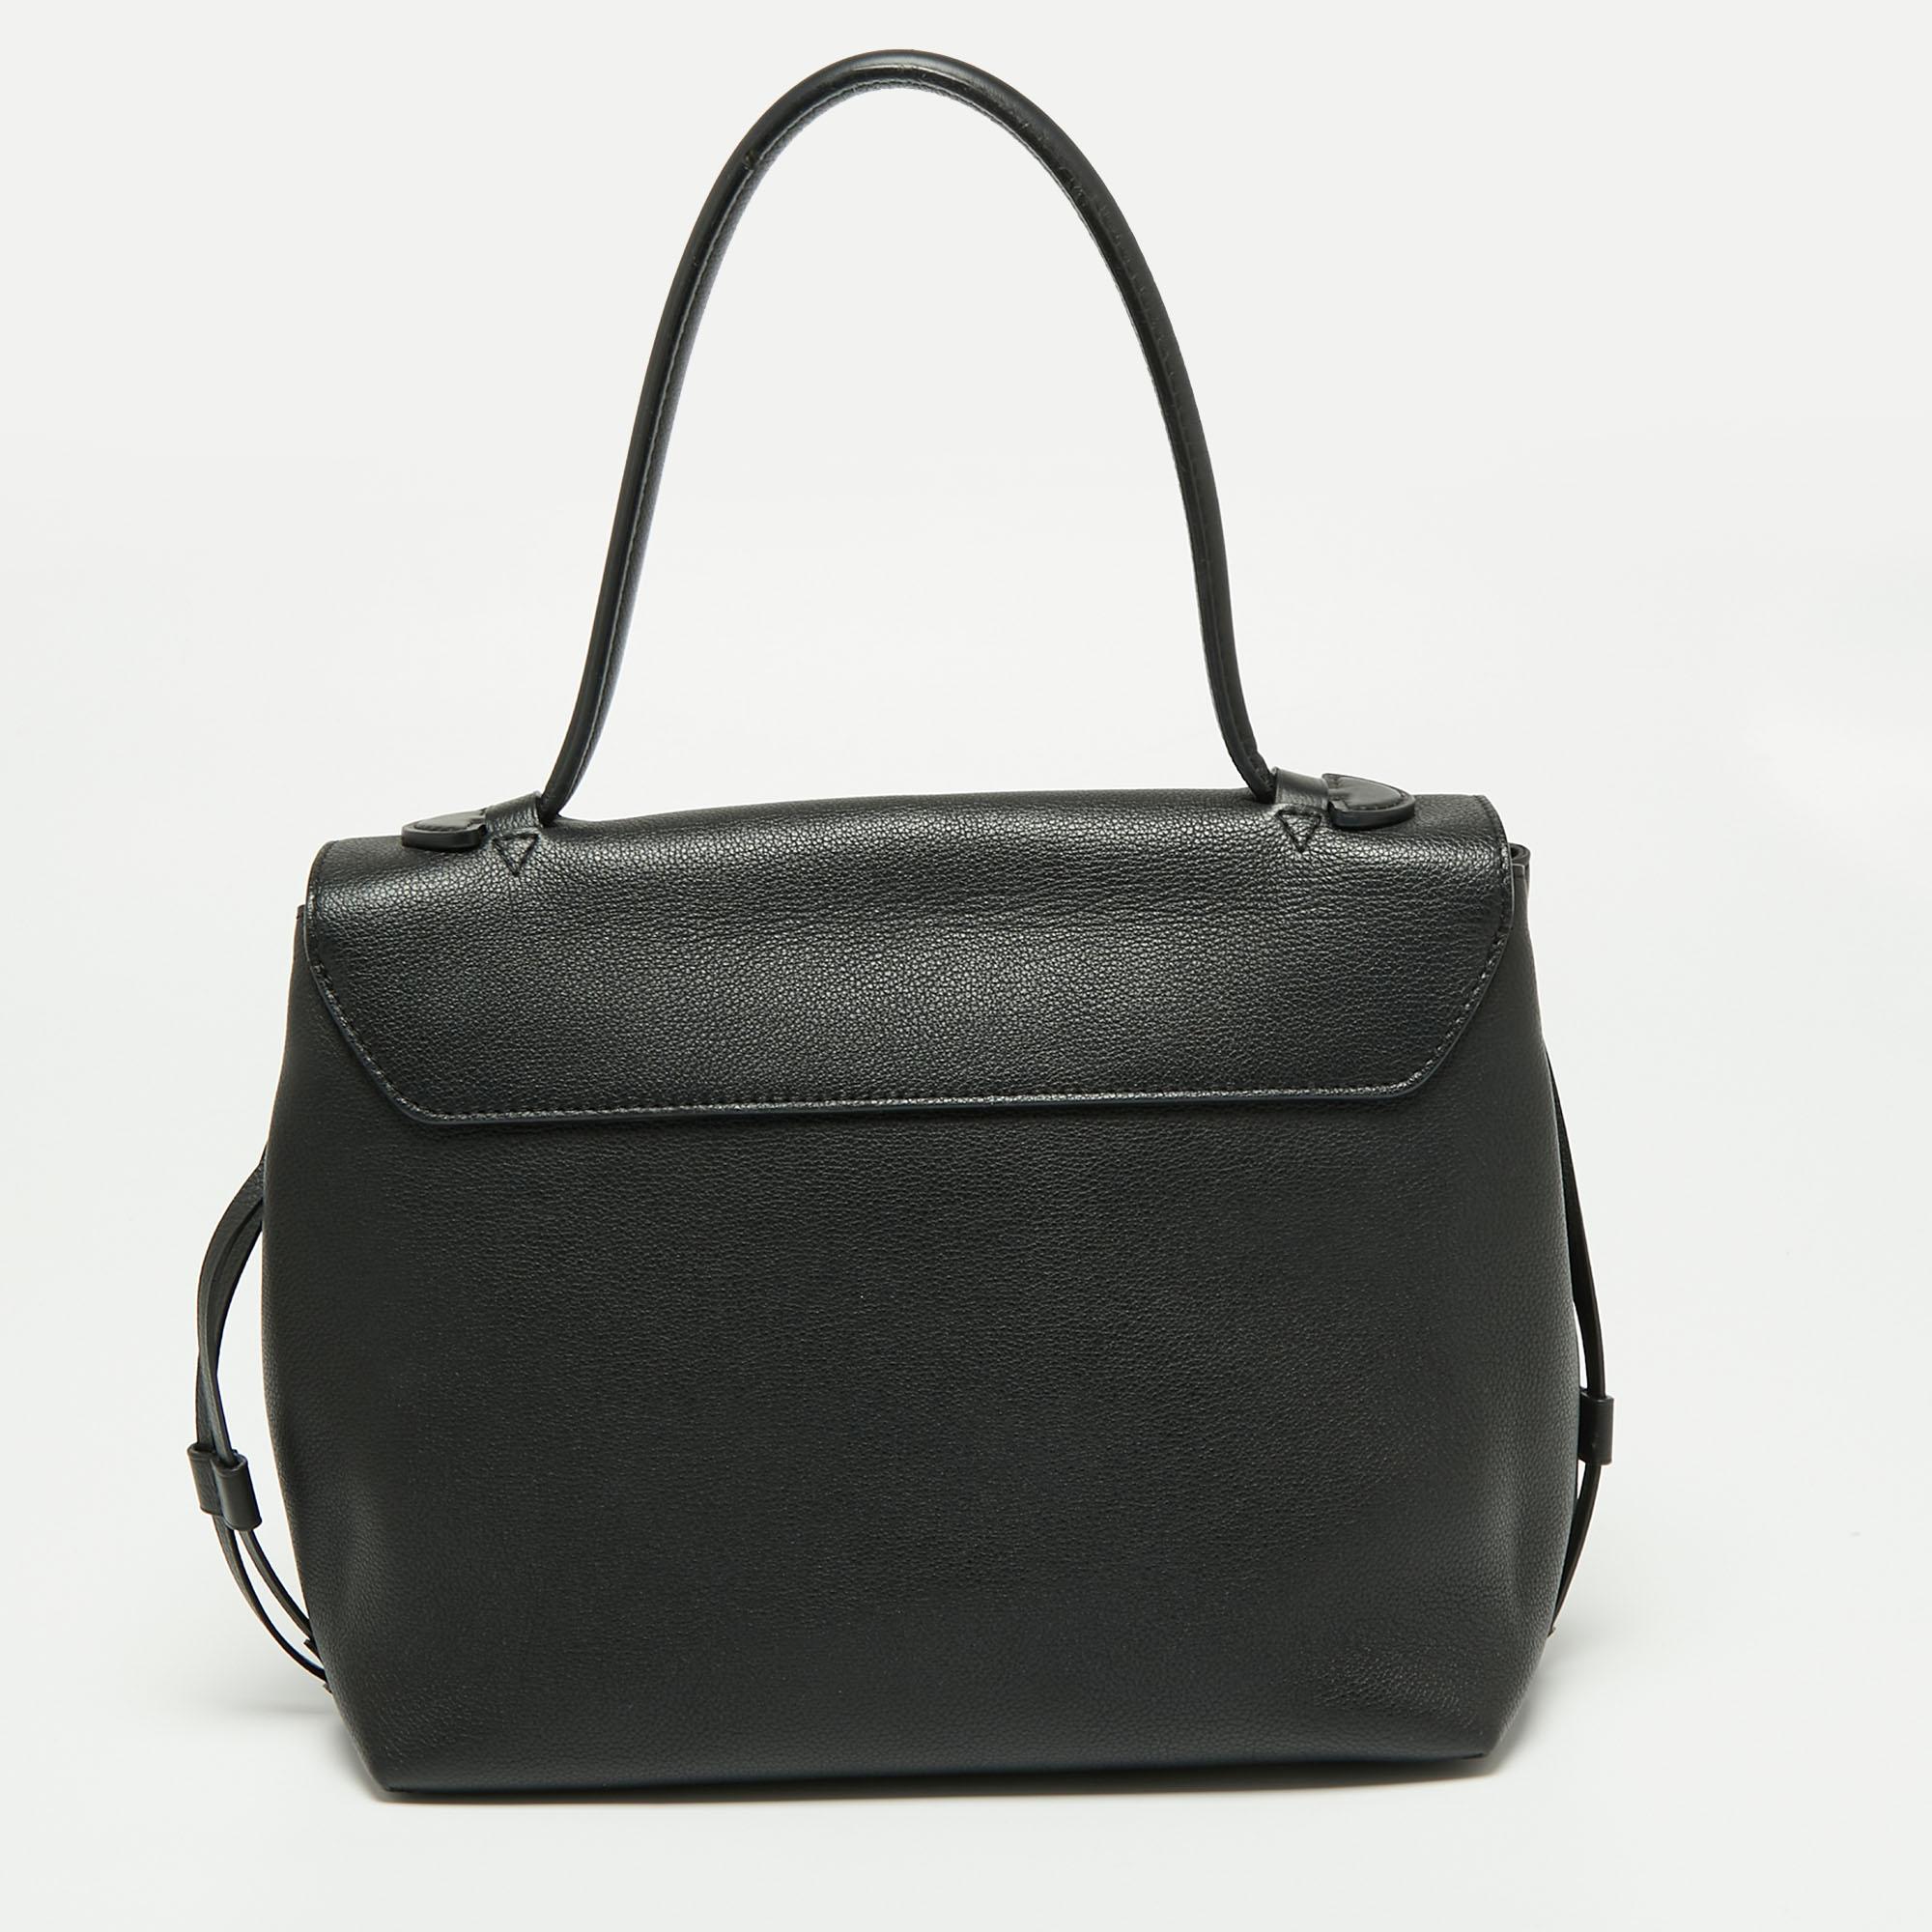 For years, women have leaned towards Louis Vuitton's handbags when it comes to powering their personal style. This Lockme MM bag, like all the other handbags, is durable and stylish. Crafted from luxe leather, it comes with a single top handle and a